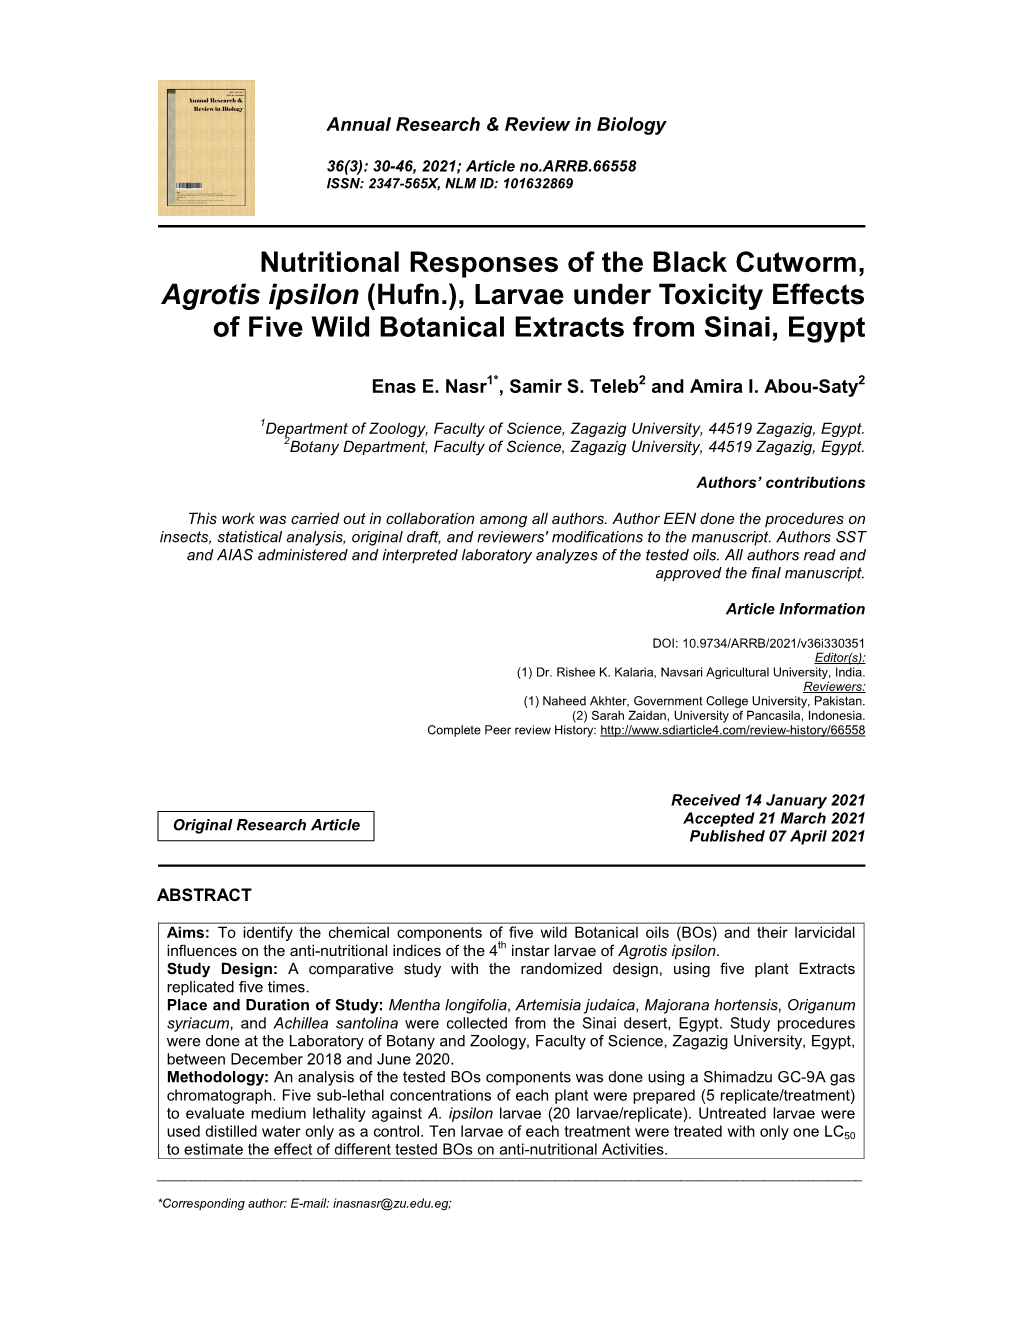 Nutritional Responses of the Black Cutworm, Agrotis Ipsilon (Hufn.), Larvae Under Toxicity Effects of Five Wild Botanical Extracts from Sinai, Egypt